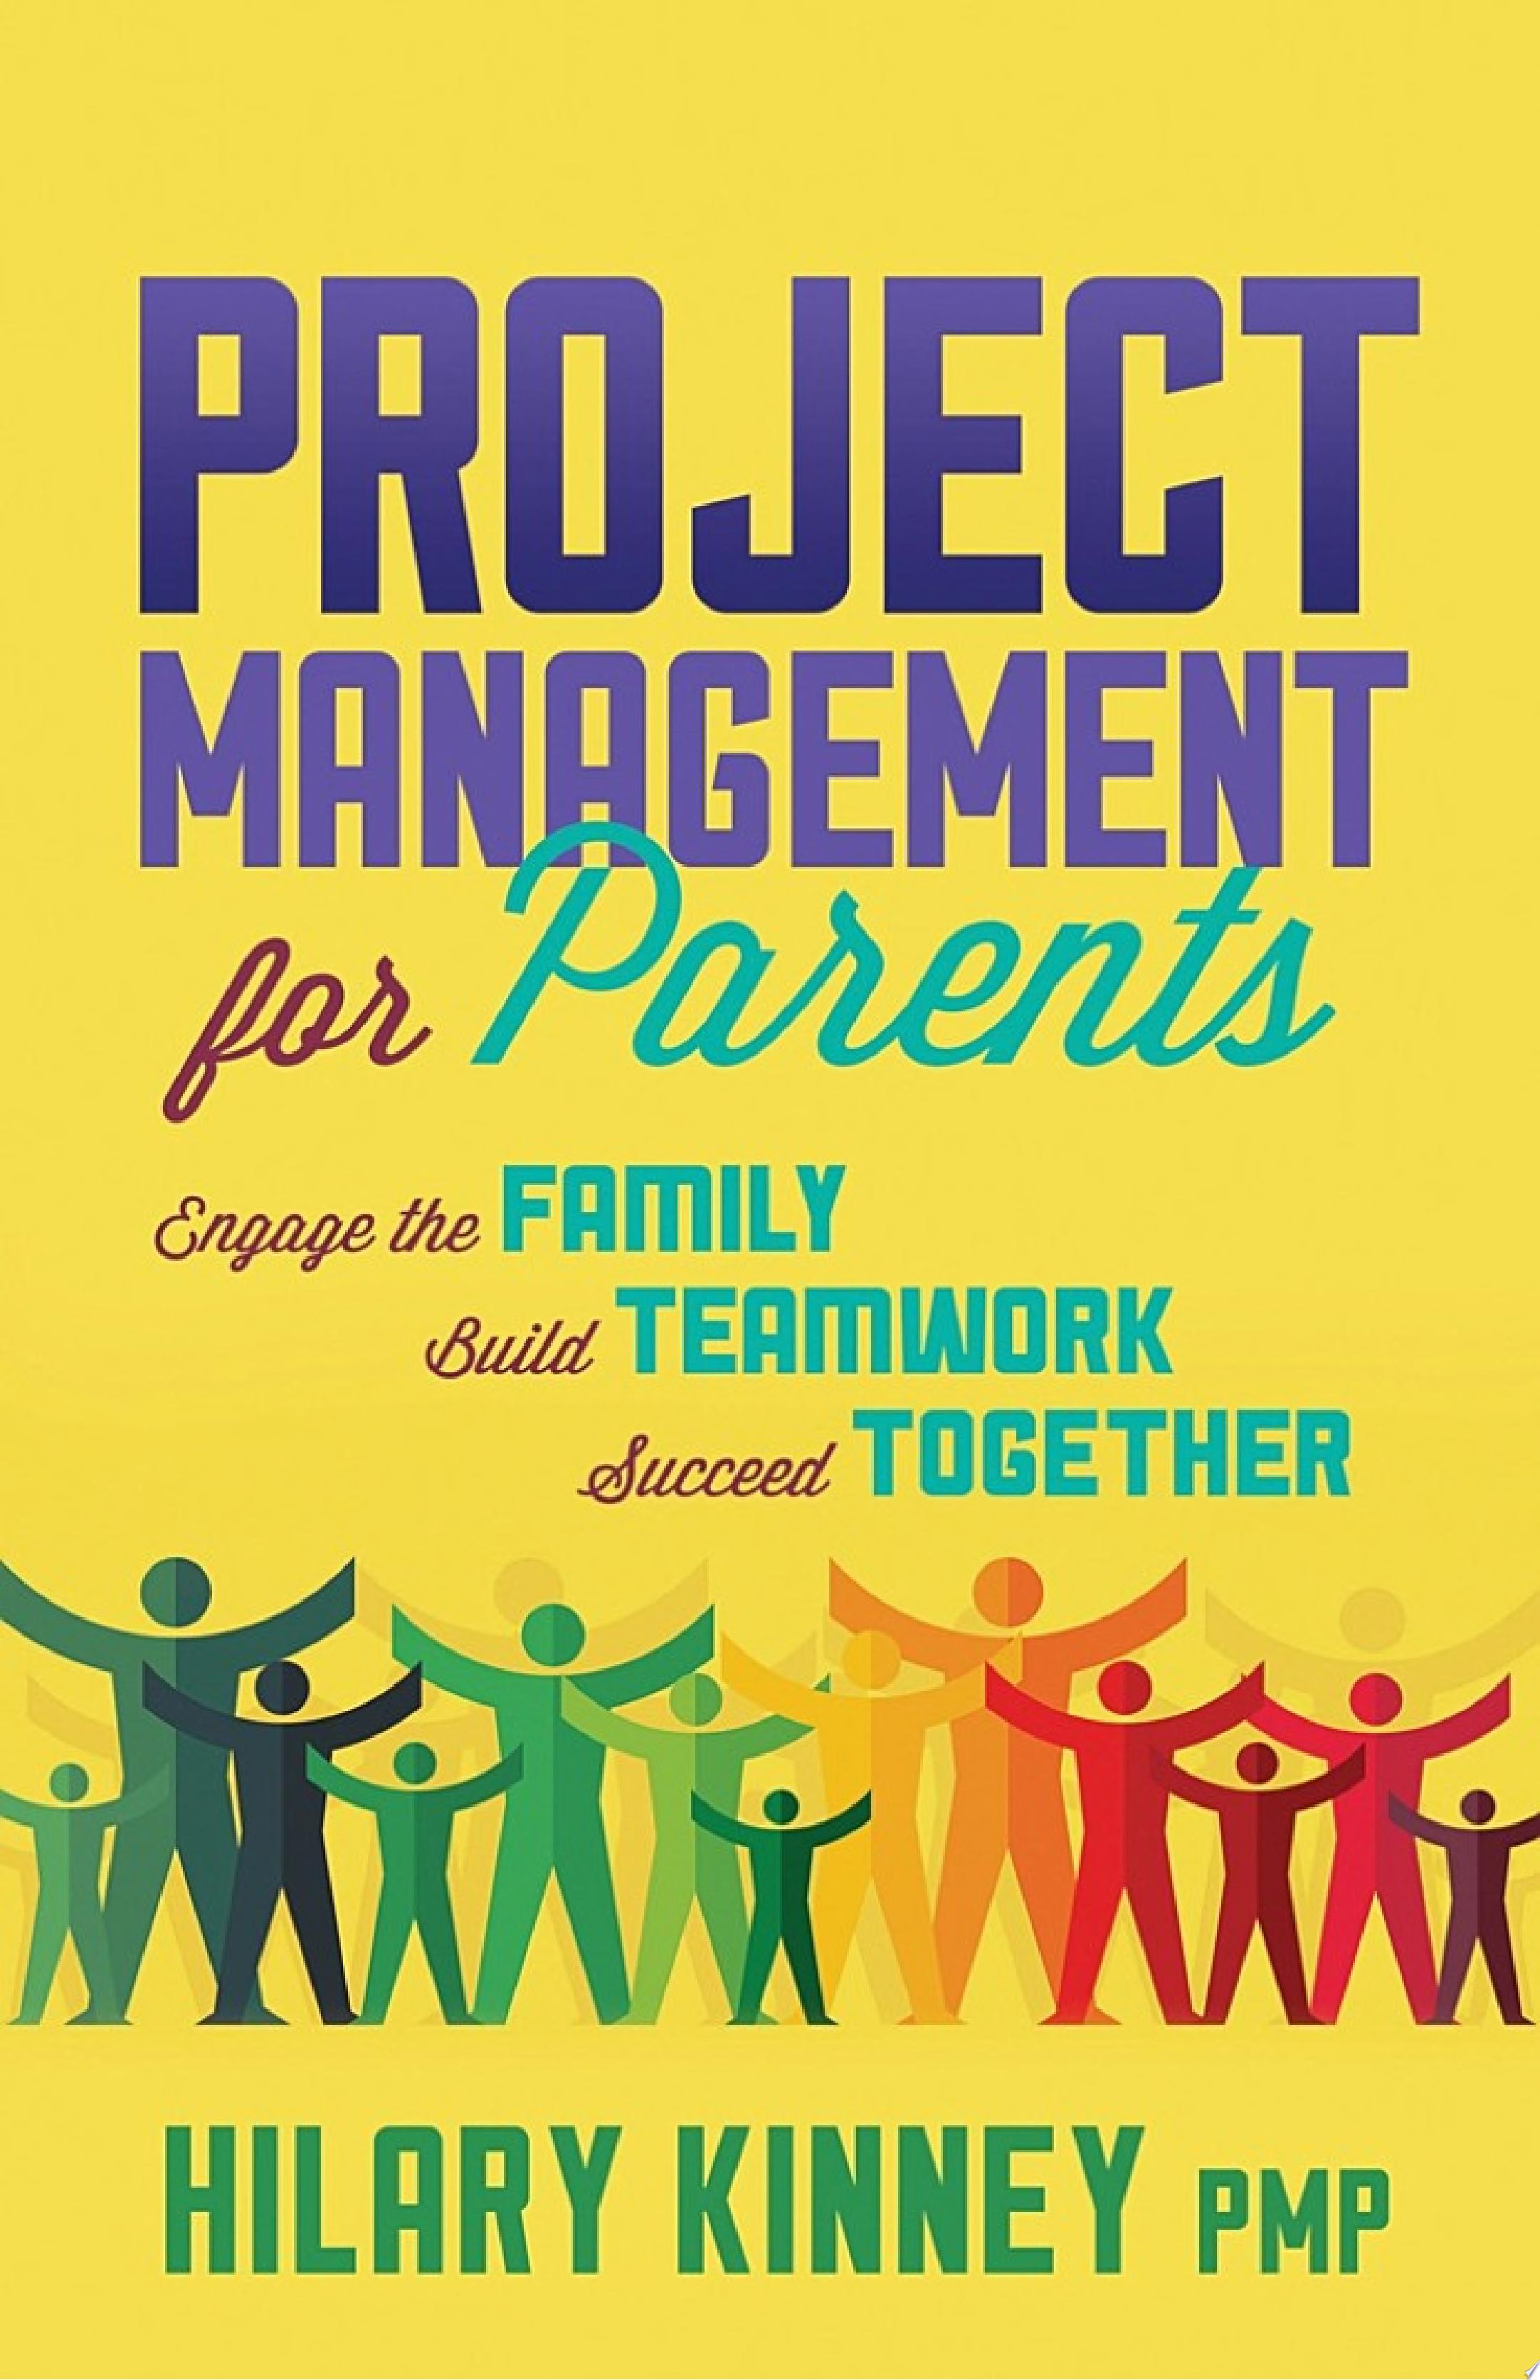 Image for "Project Management for Parents"